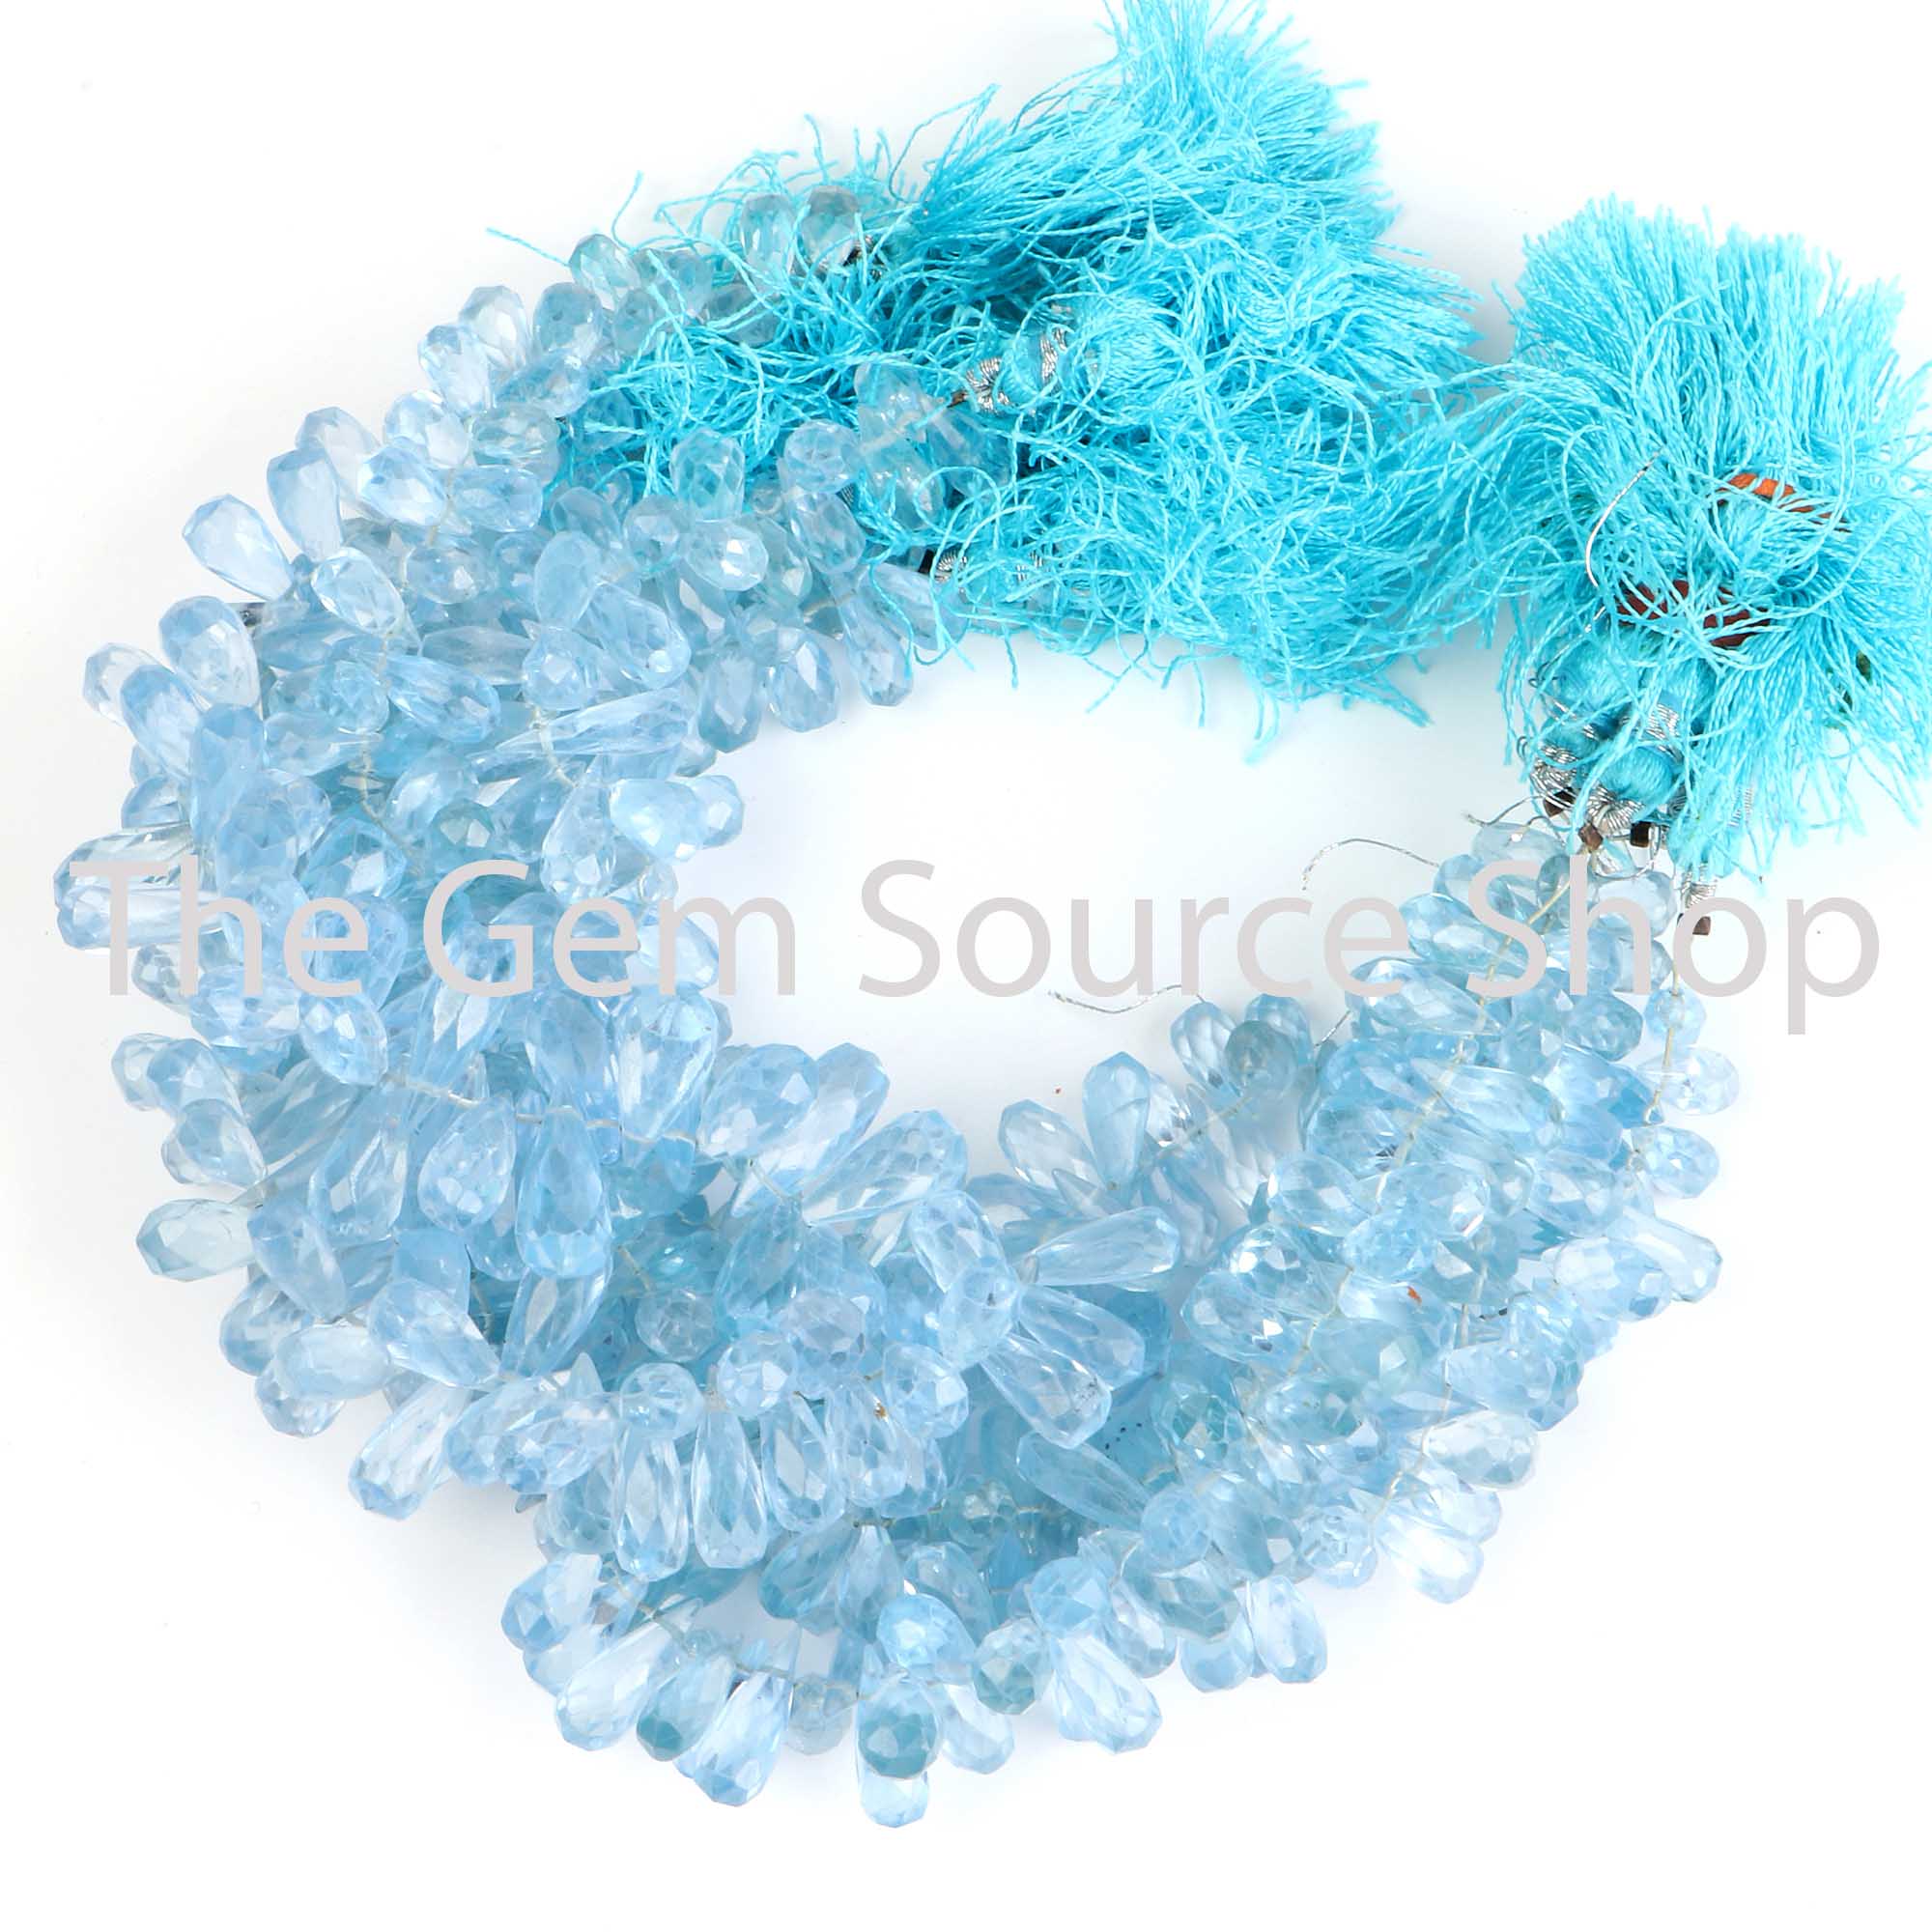 Sky Blue Topaz Cubic Zirconia Beads, Cubic Zirconia Faceted Drop Beads, Side Drill Drop Beads